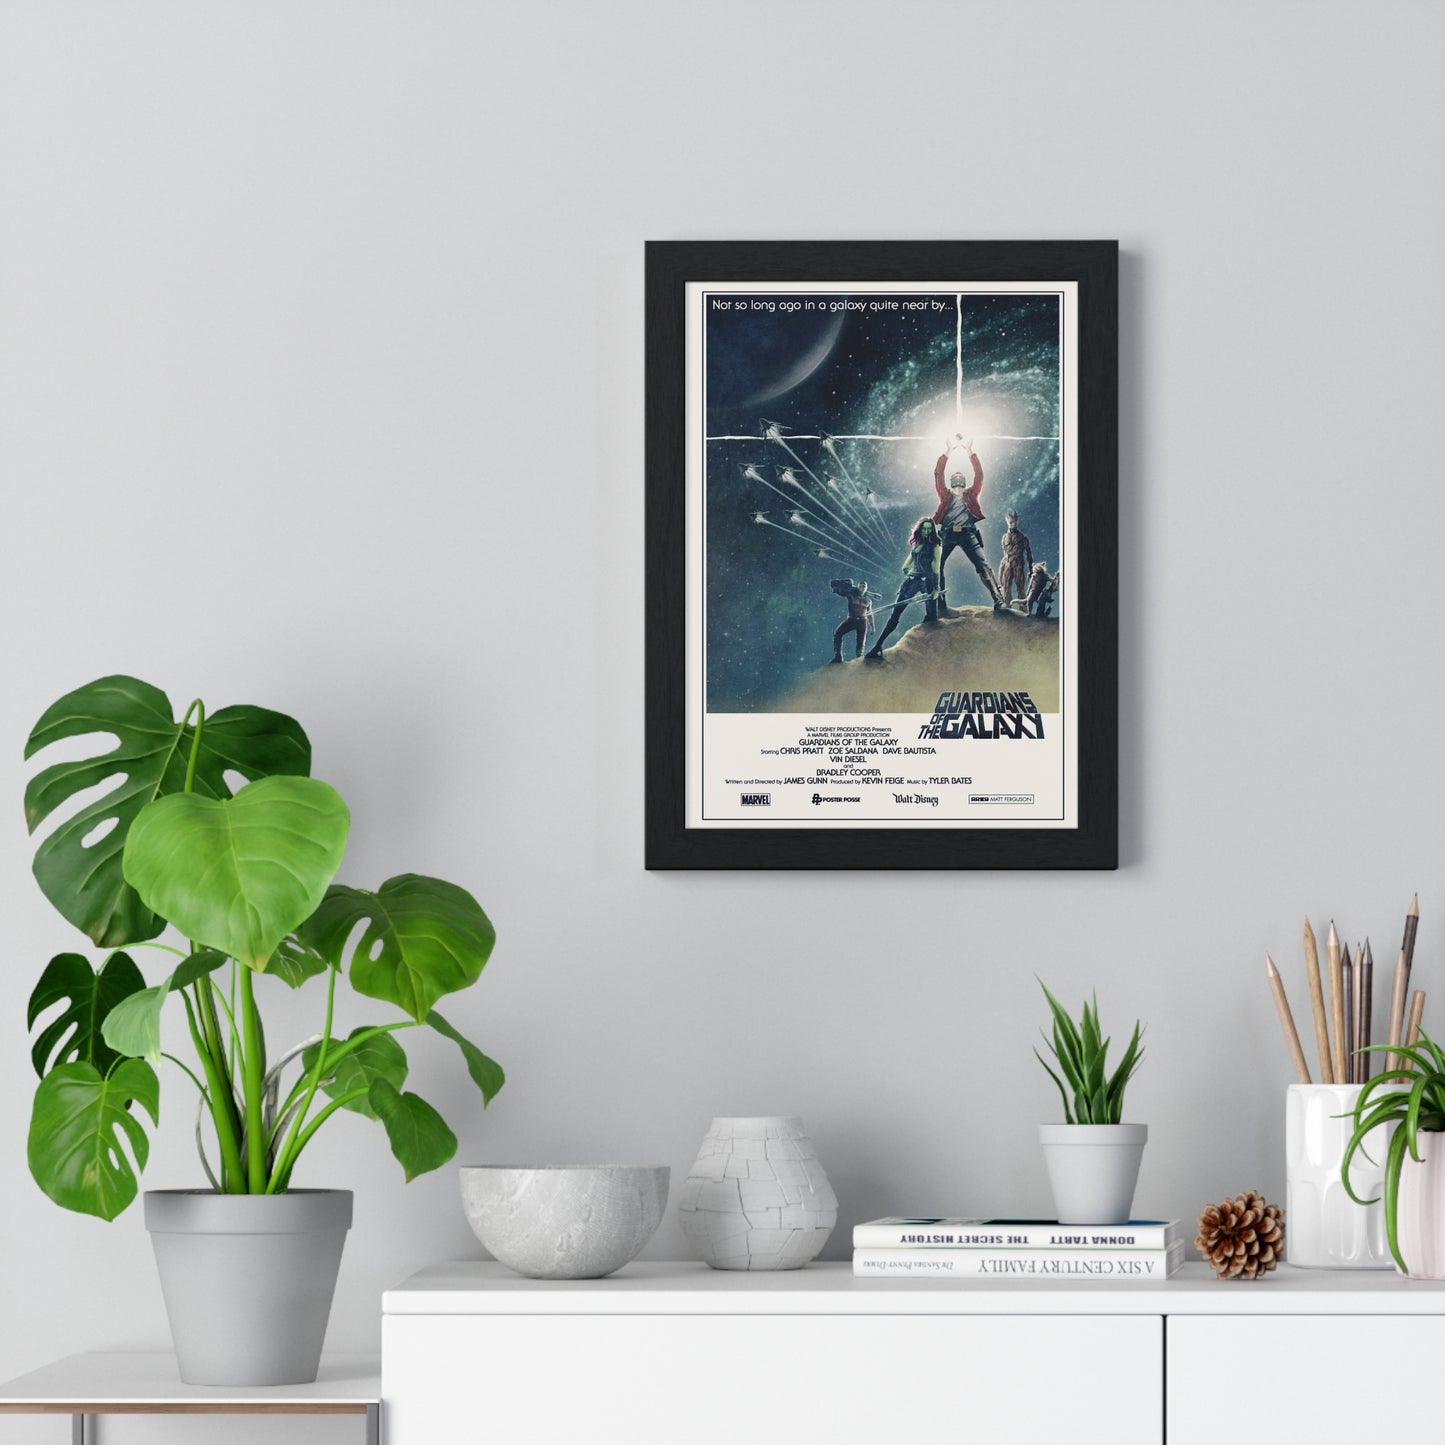 Guardians of the Galaxy Vol 1 & 2 art posters